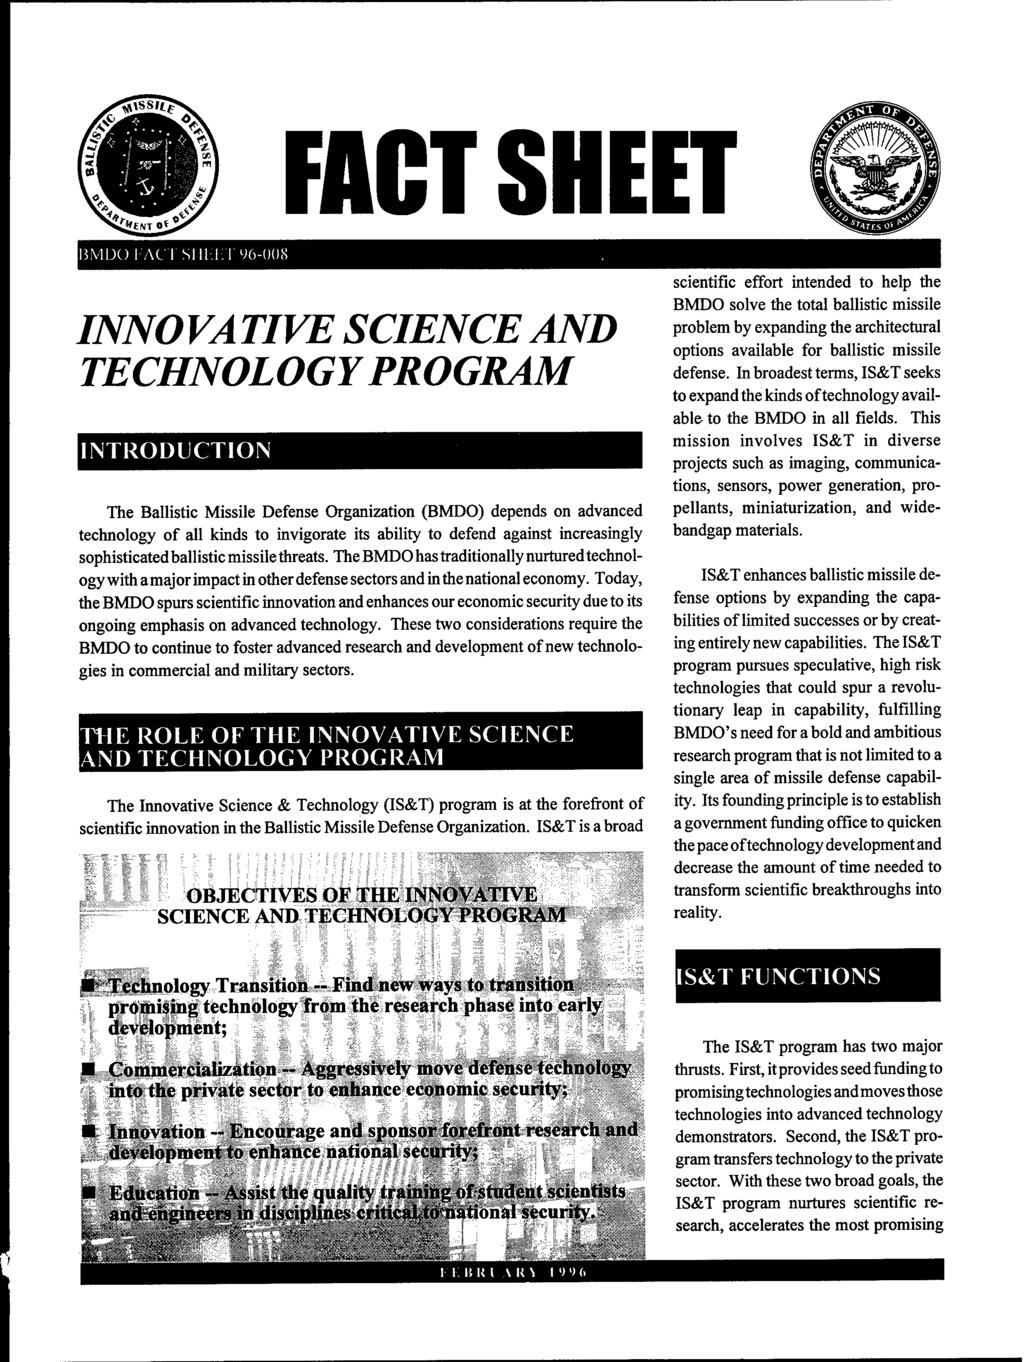 FACT SHEET ßMDO l-'ac 96-008 INNO VA TIVE SCIENCE AND TECHNOLOGY PROGRAM INTRODUCTION The Ballistic Missile Defense Organization (BMDO) depends on advanced technology of all kinds to invigorate its